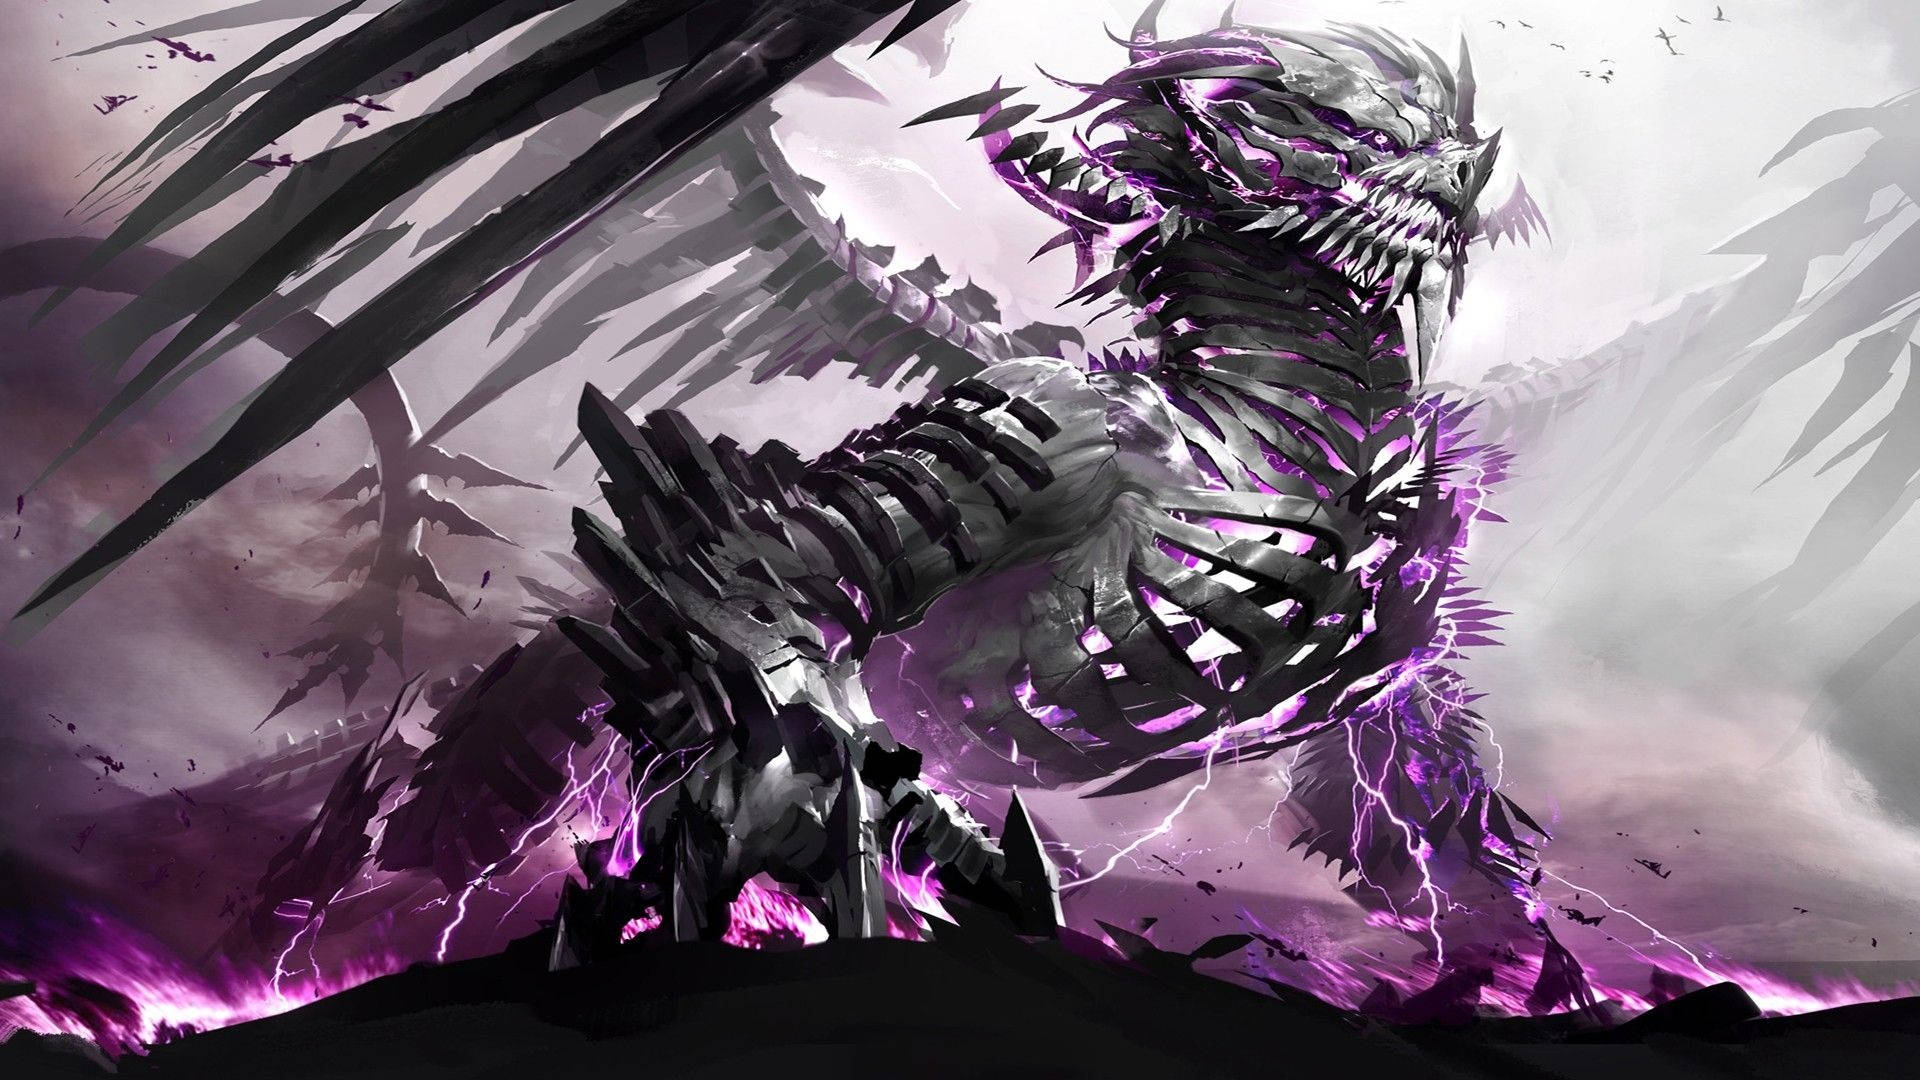 Imposing Power - Majestic Elder Dragon from Guild Wars - Awesome PFP Wallpaper